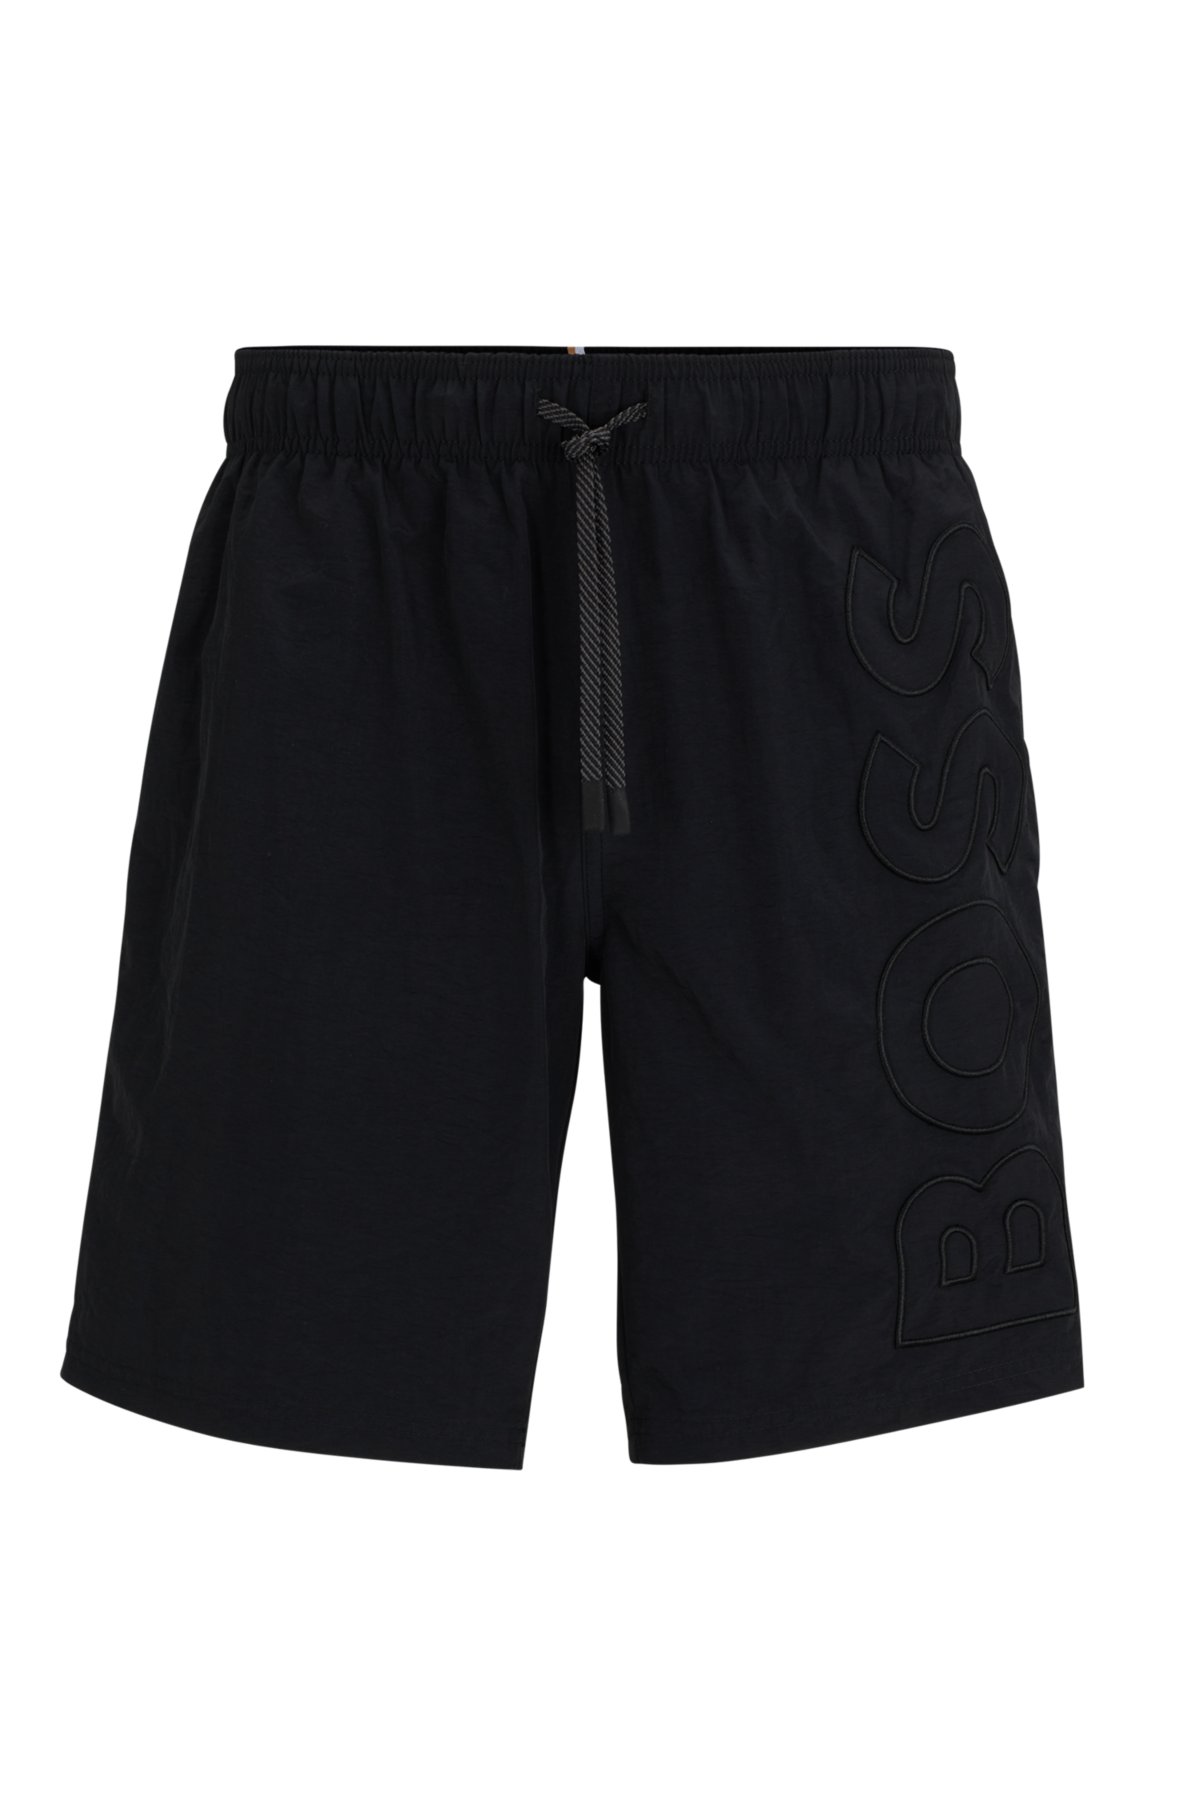 Swim shorts with embroidered logo, Black